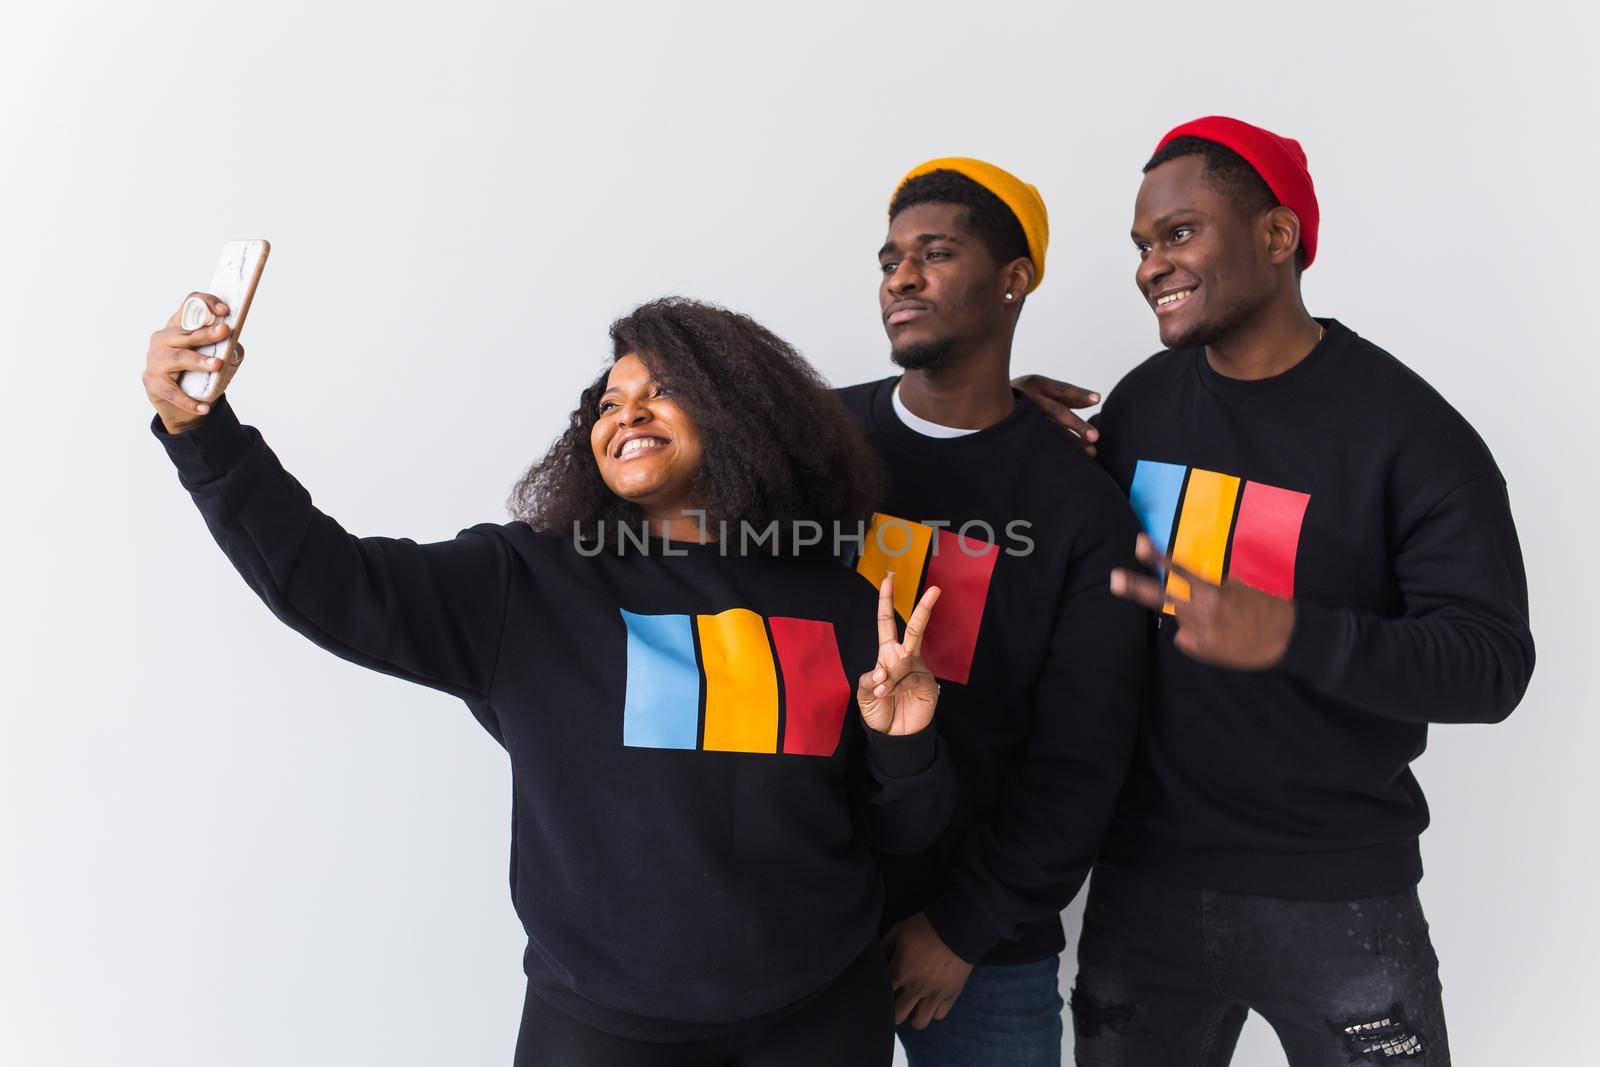 Friendship and fun concept - Group of friends afro american men and woman taking selfie in studio on white background. by Satura86